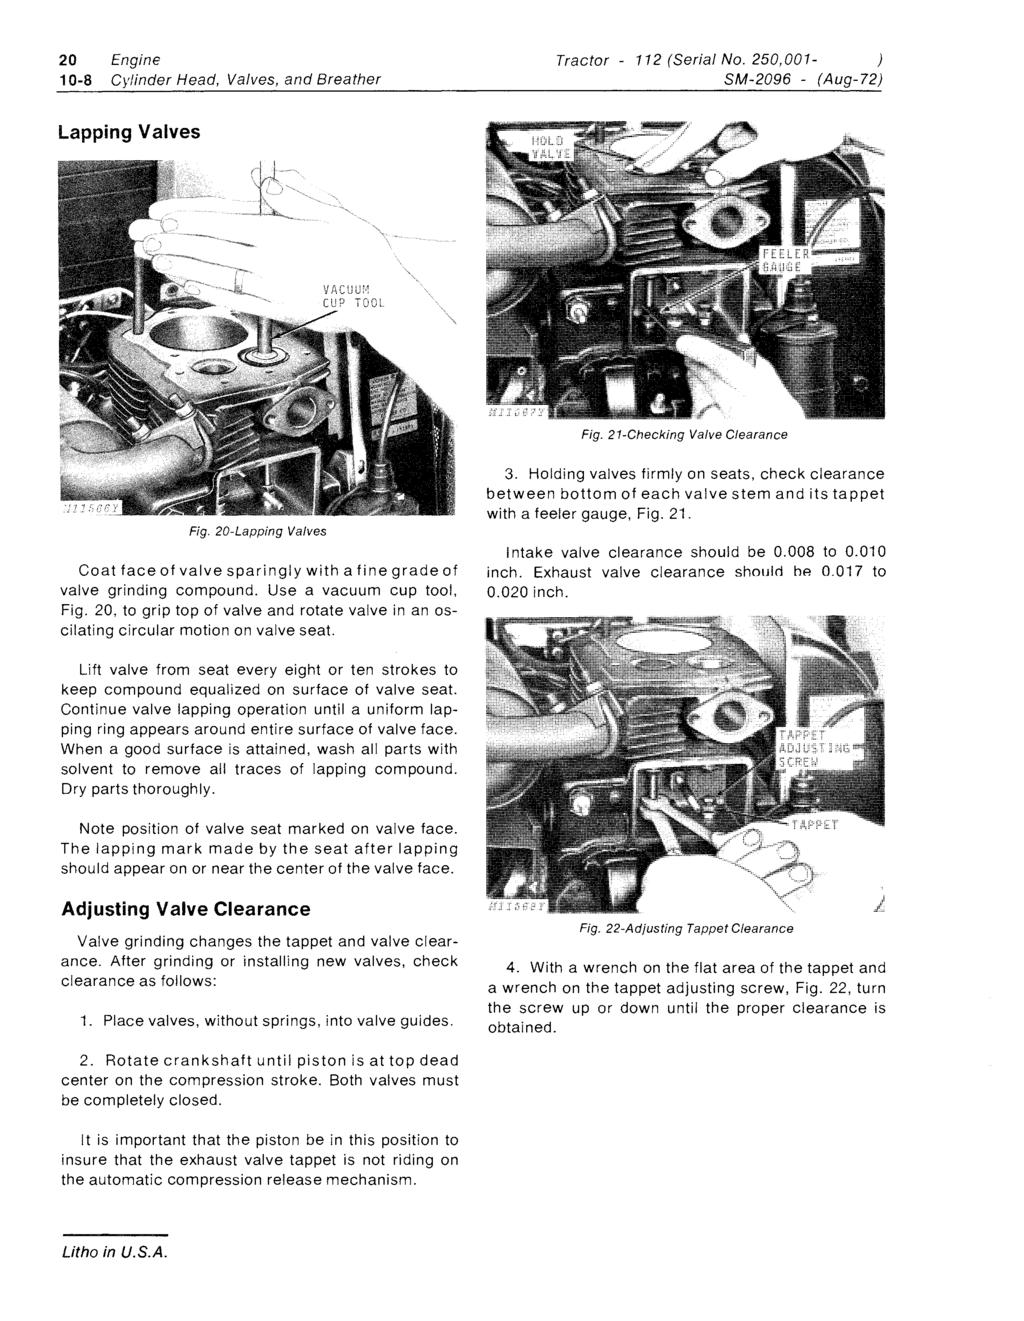 20 Engine 10-8 Cylinder Head, Valves, and Breather Tractor - 112 (Serial No. 250,001- ) SM-2096 - (Aug-72) Lapping Valves Fig. 21-Checking Valve Clearance Fig.